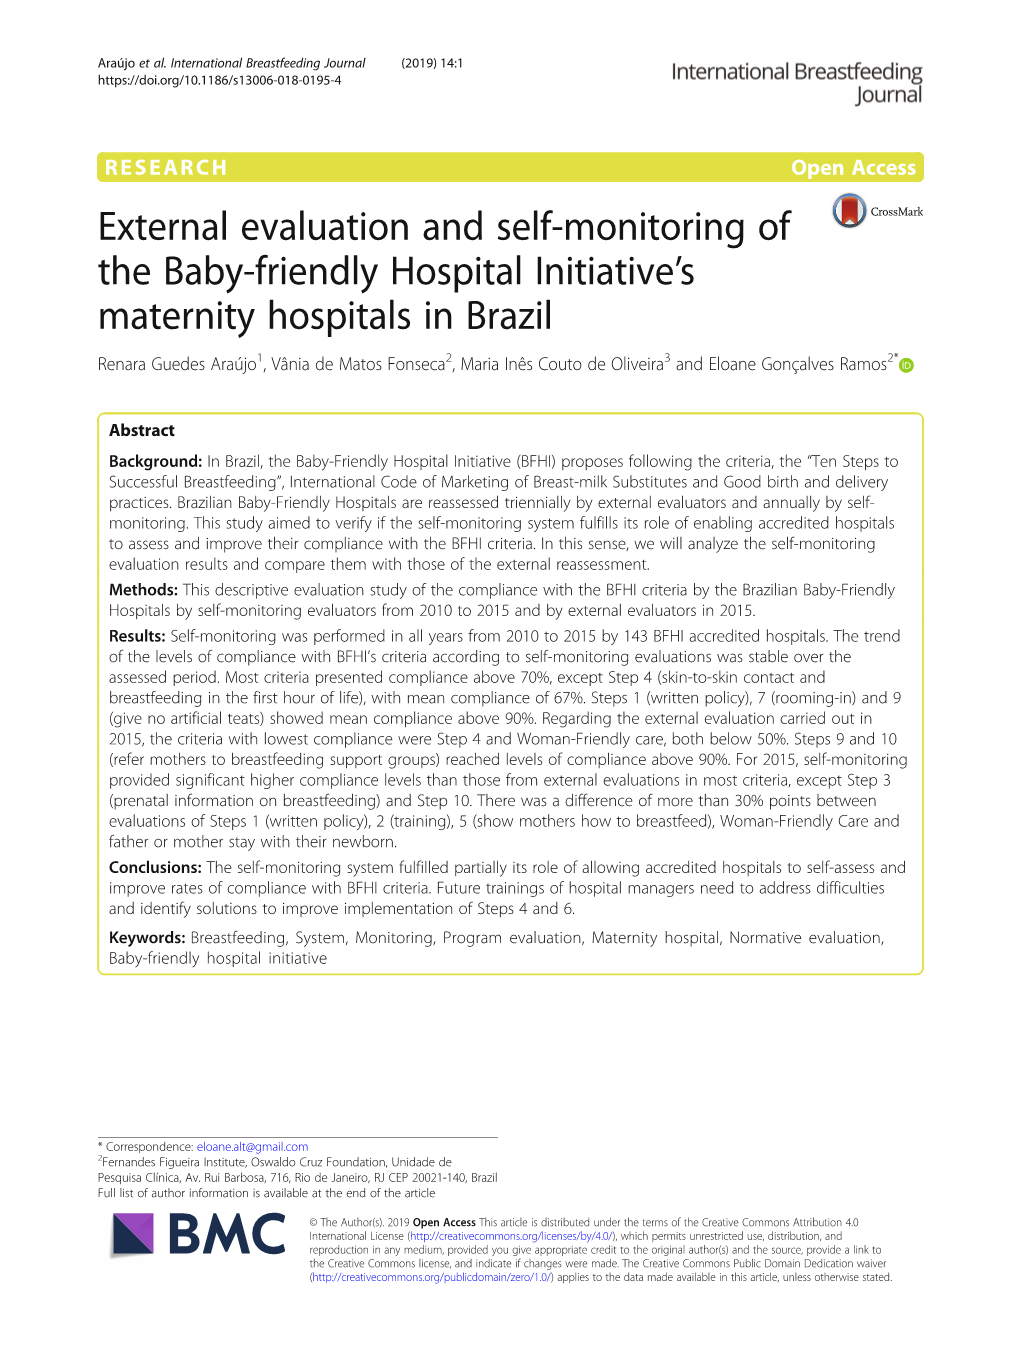 External Evaluation and Self-Monitoring of the Baby-Friendly